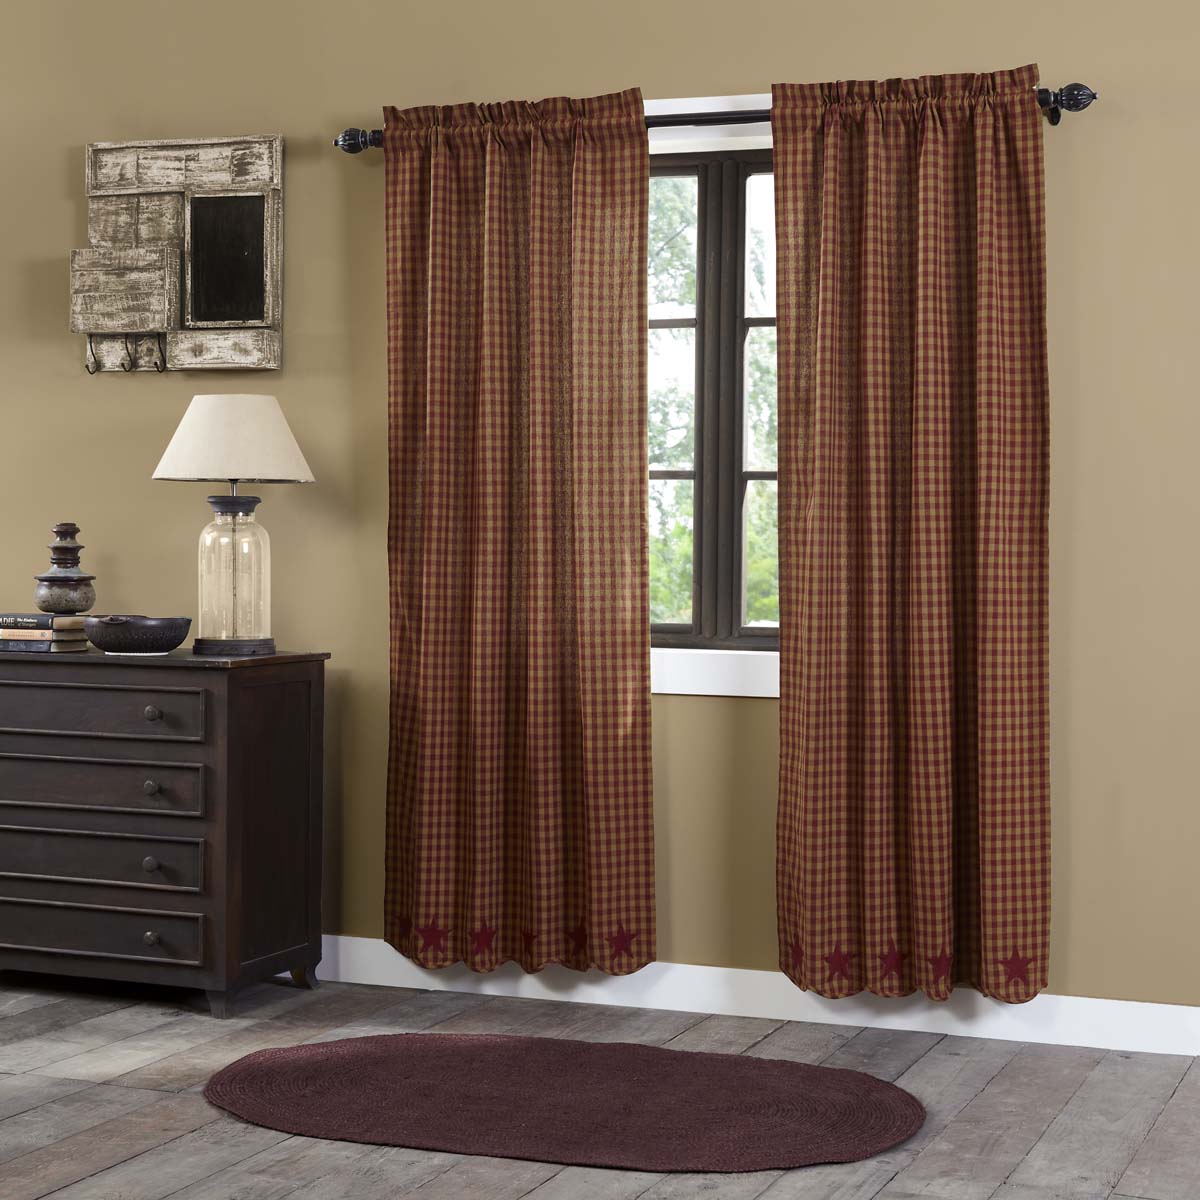 Burgundy Star Scalloped Panel Country Curtain Set of 2 84"x40"